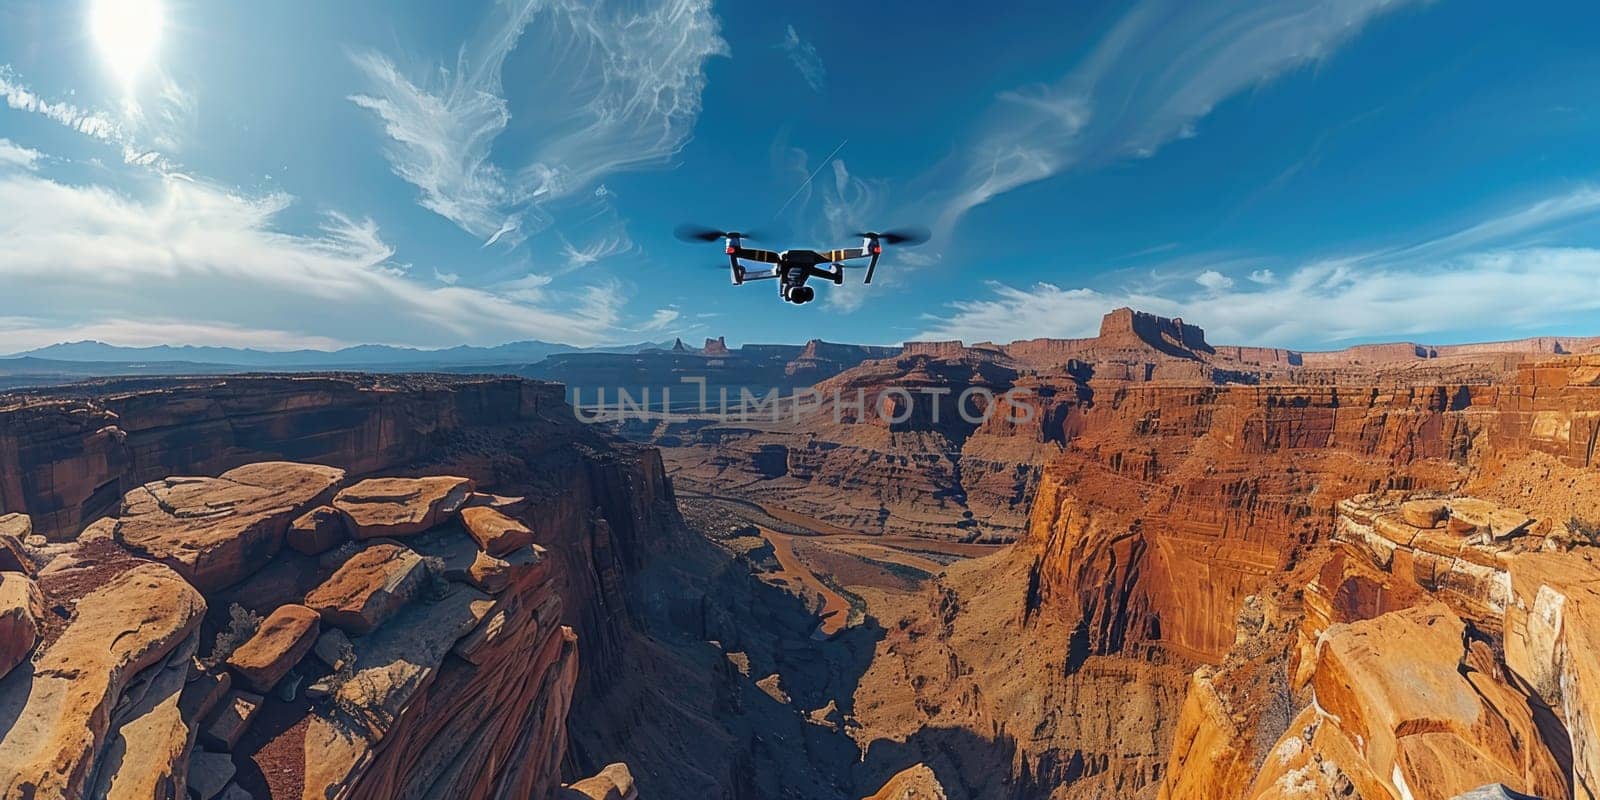 Small Plane Flying Over Desert Canyon by but_photo